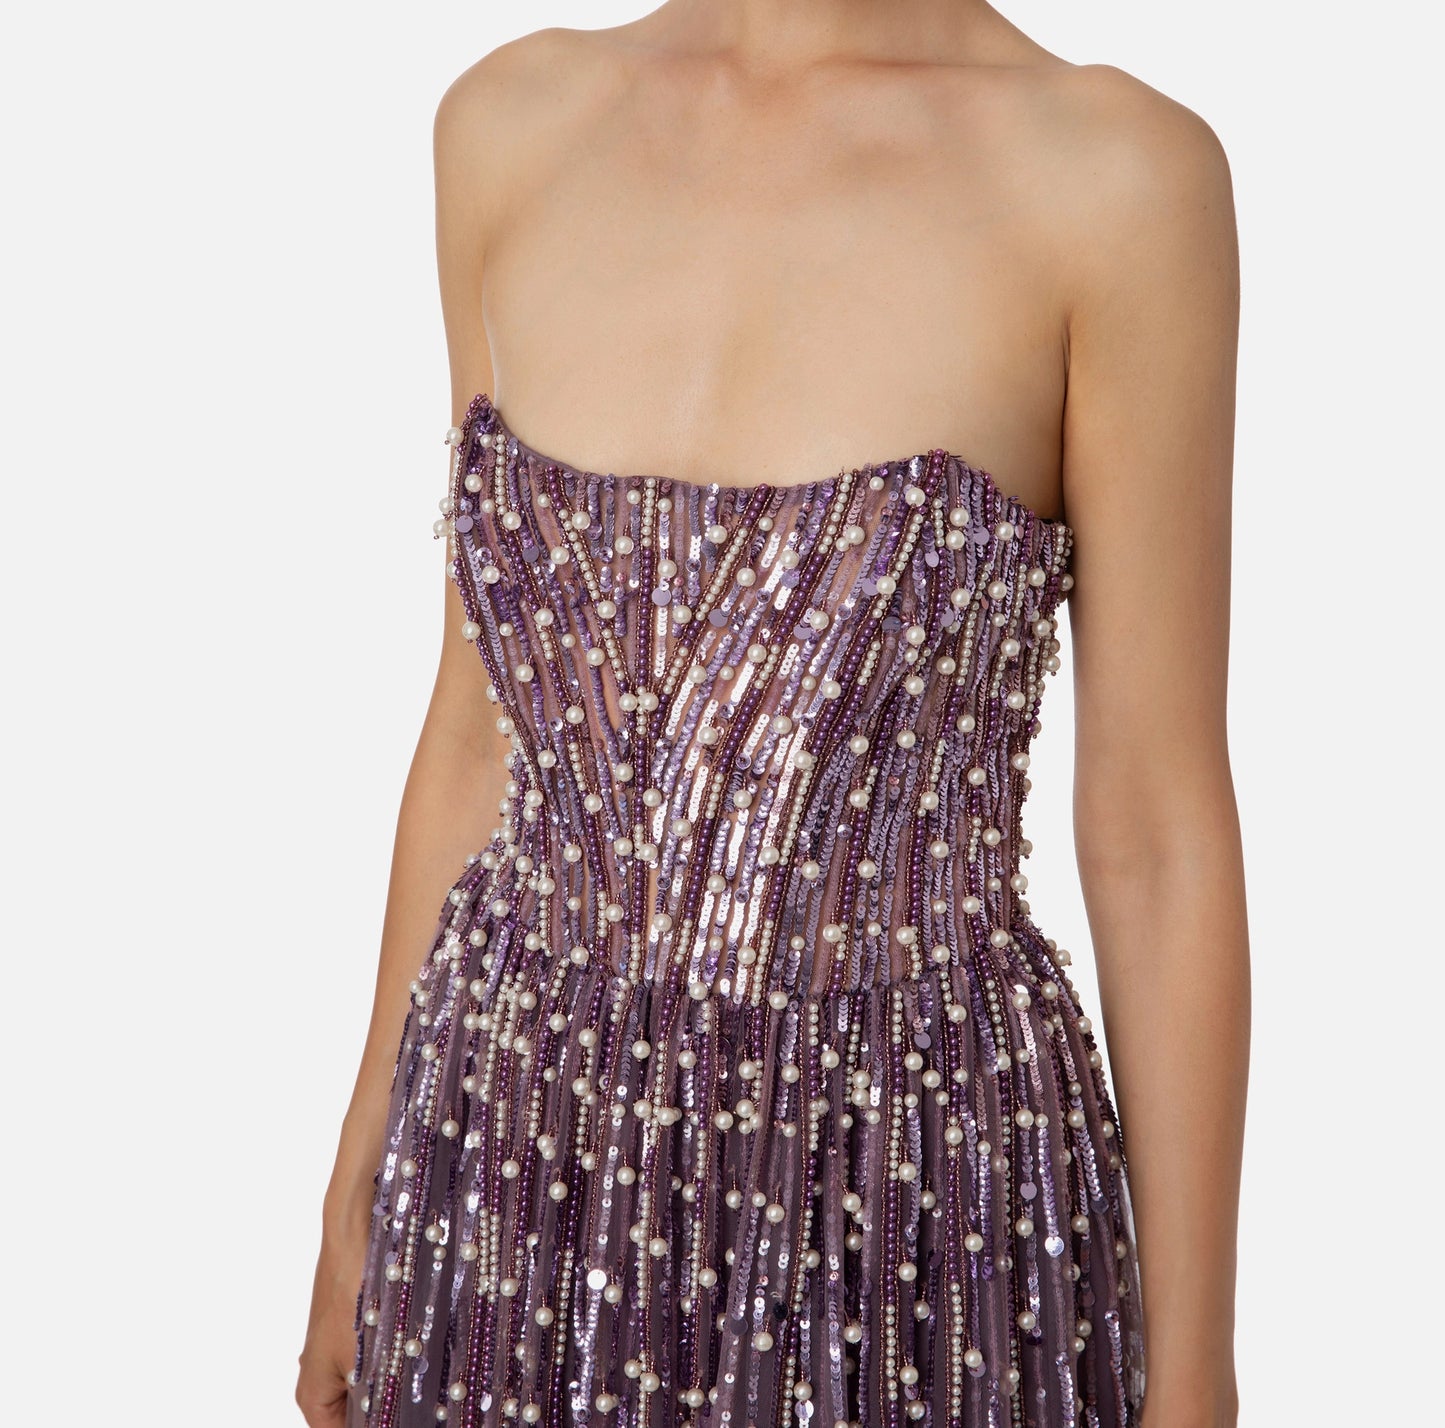 Red Carpet dress with sequins and pearls